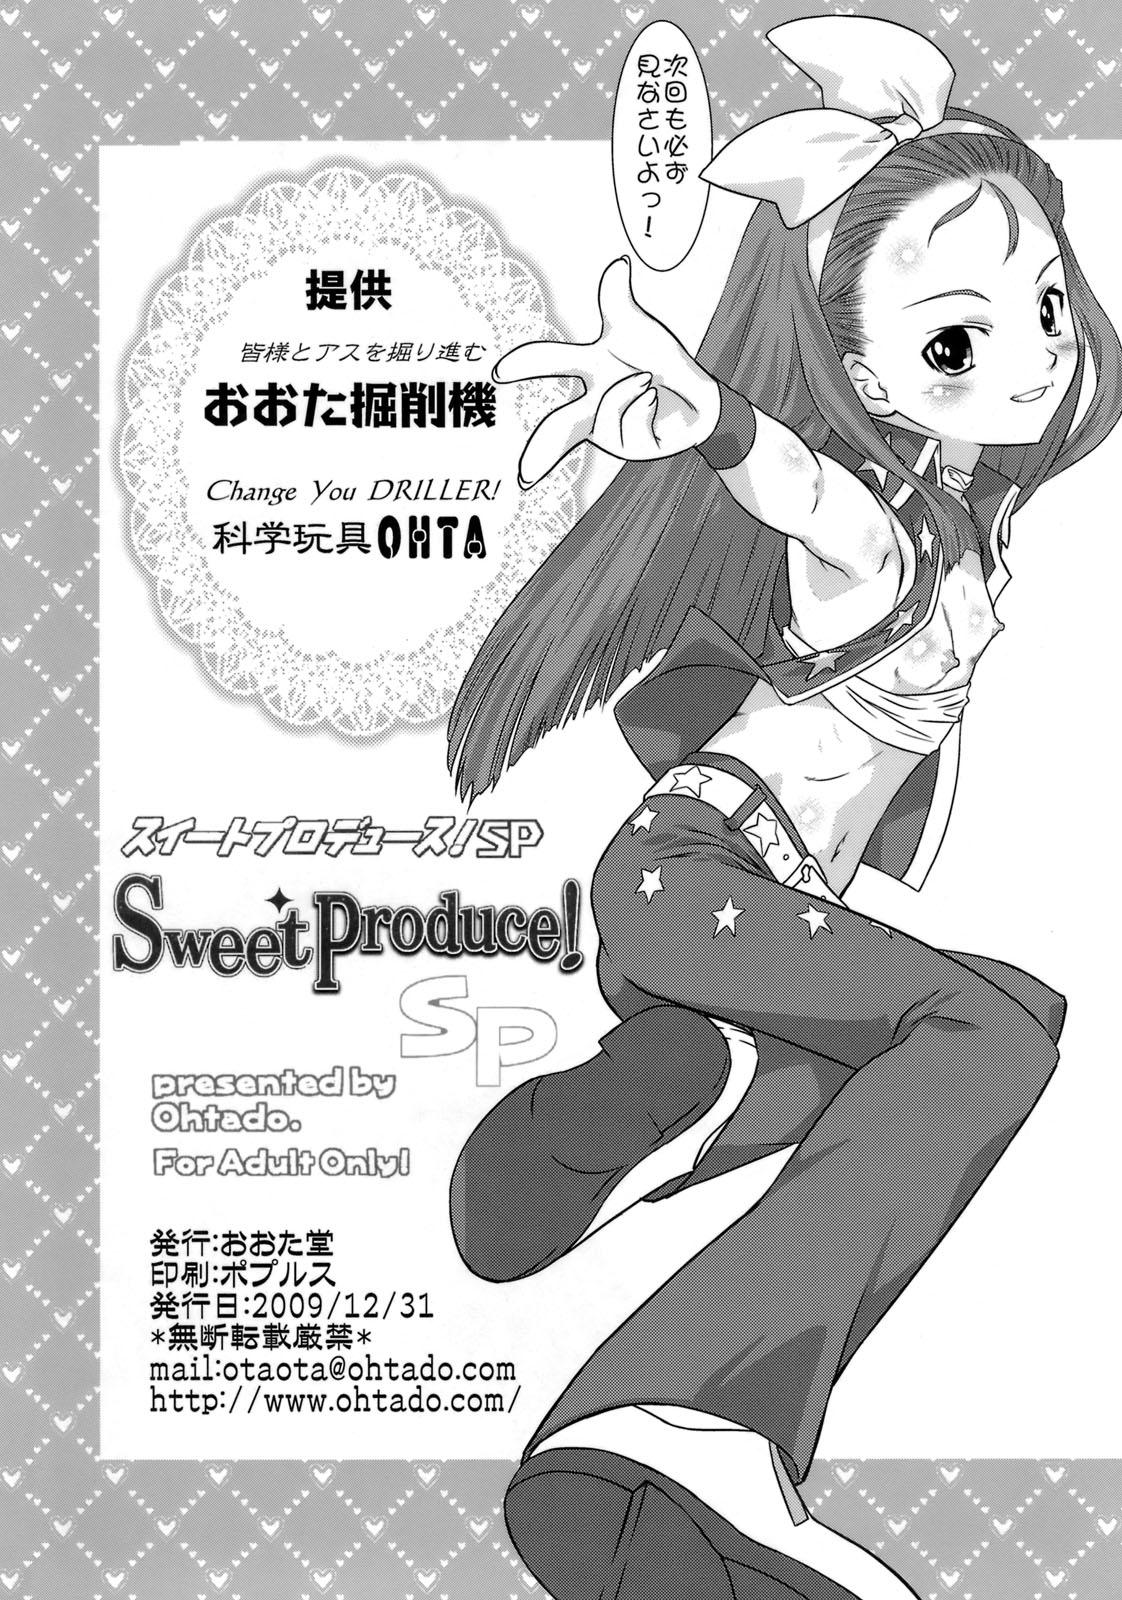 Her Sweet Produce! SP - The idolmaster Egypt - Page 29